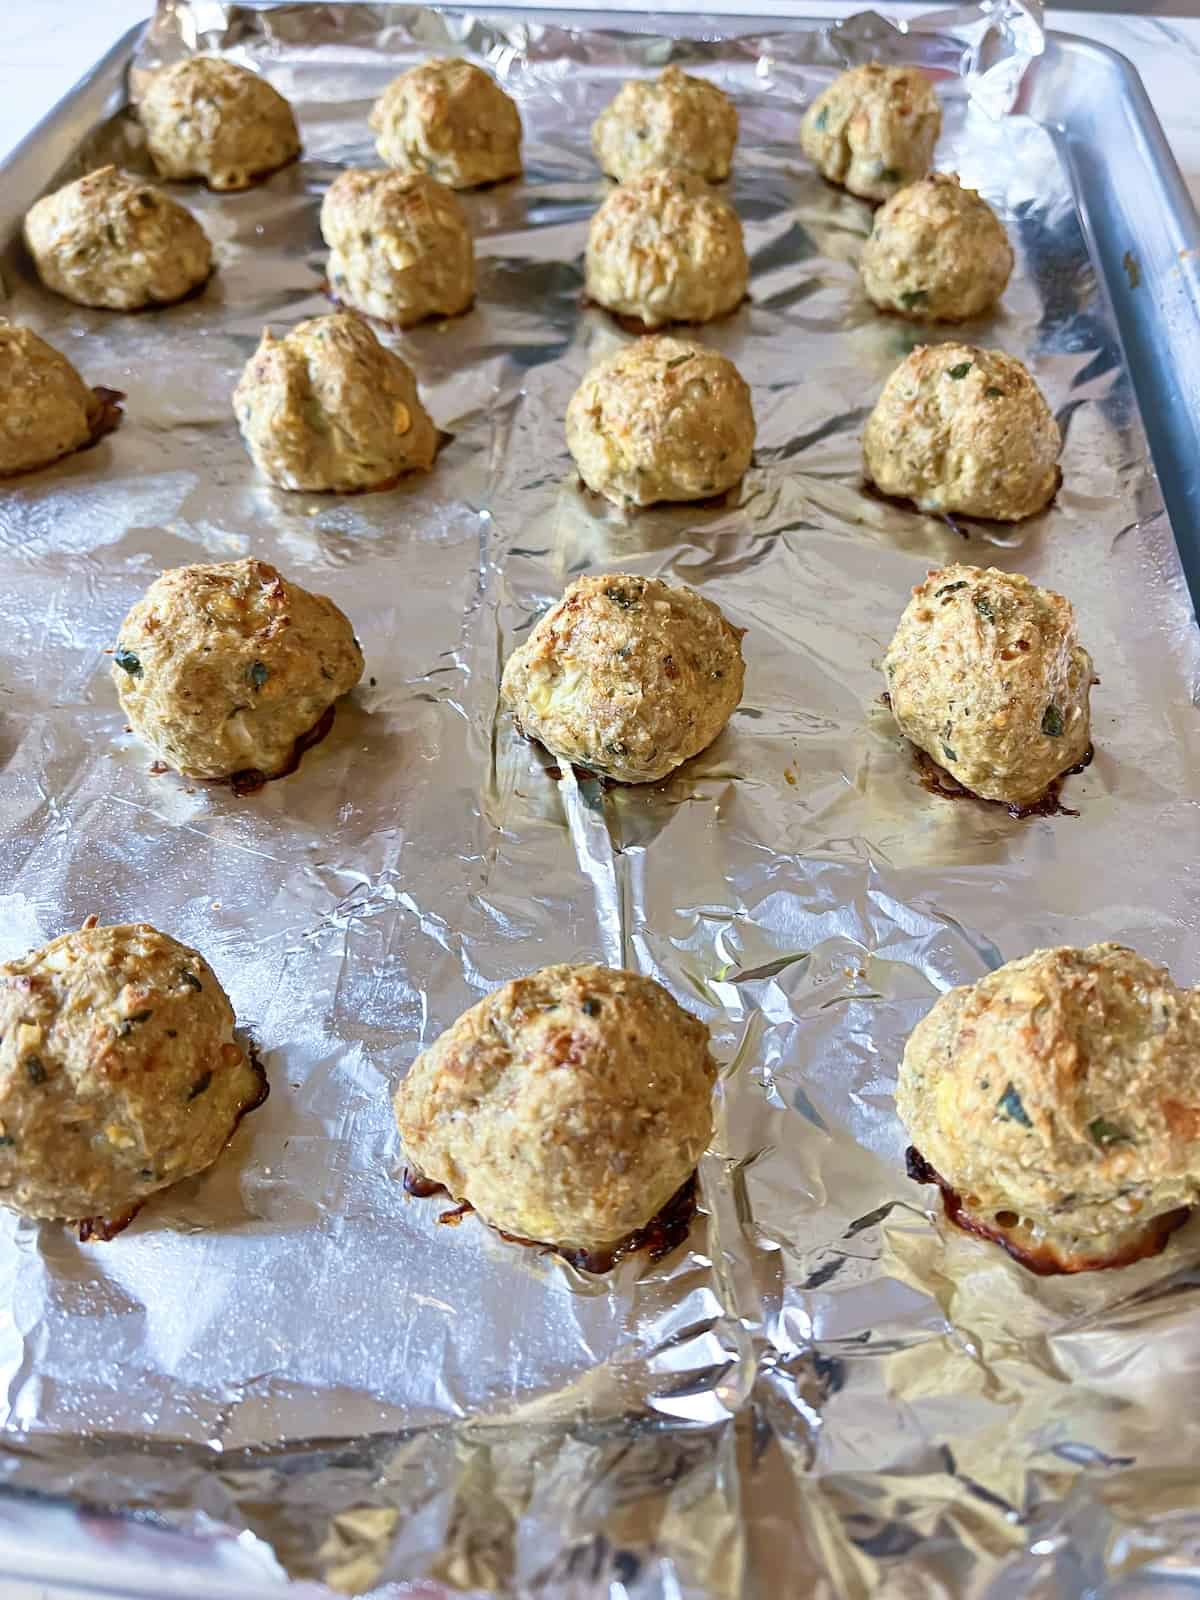 gluten-free turkey meatballs fresh out of the oven on a prepared baking sheet